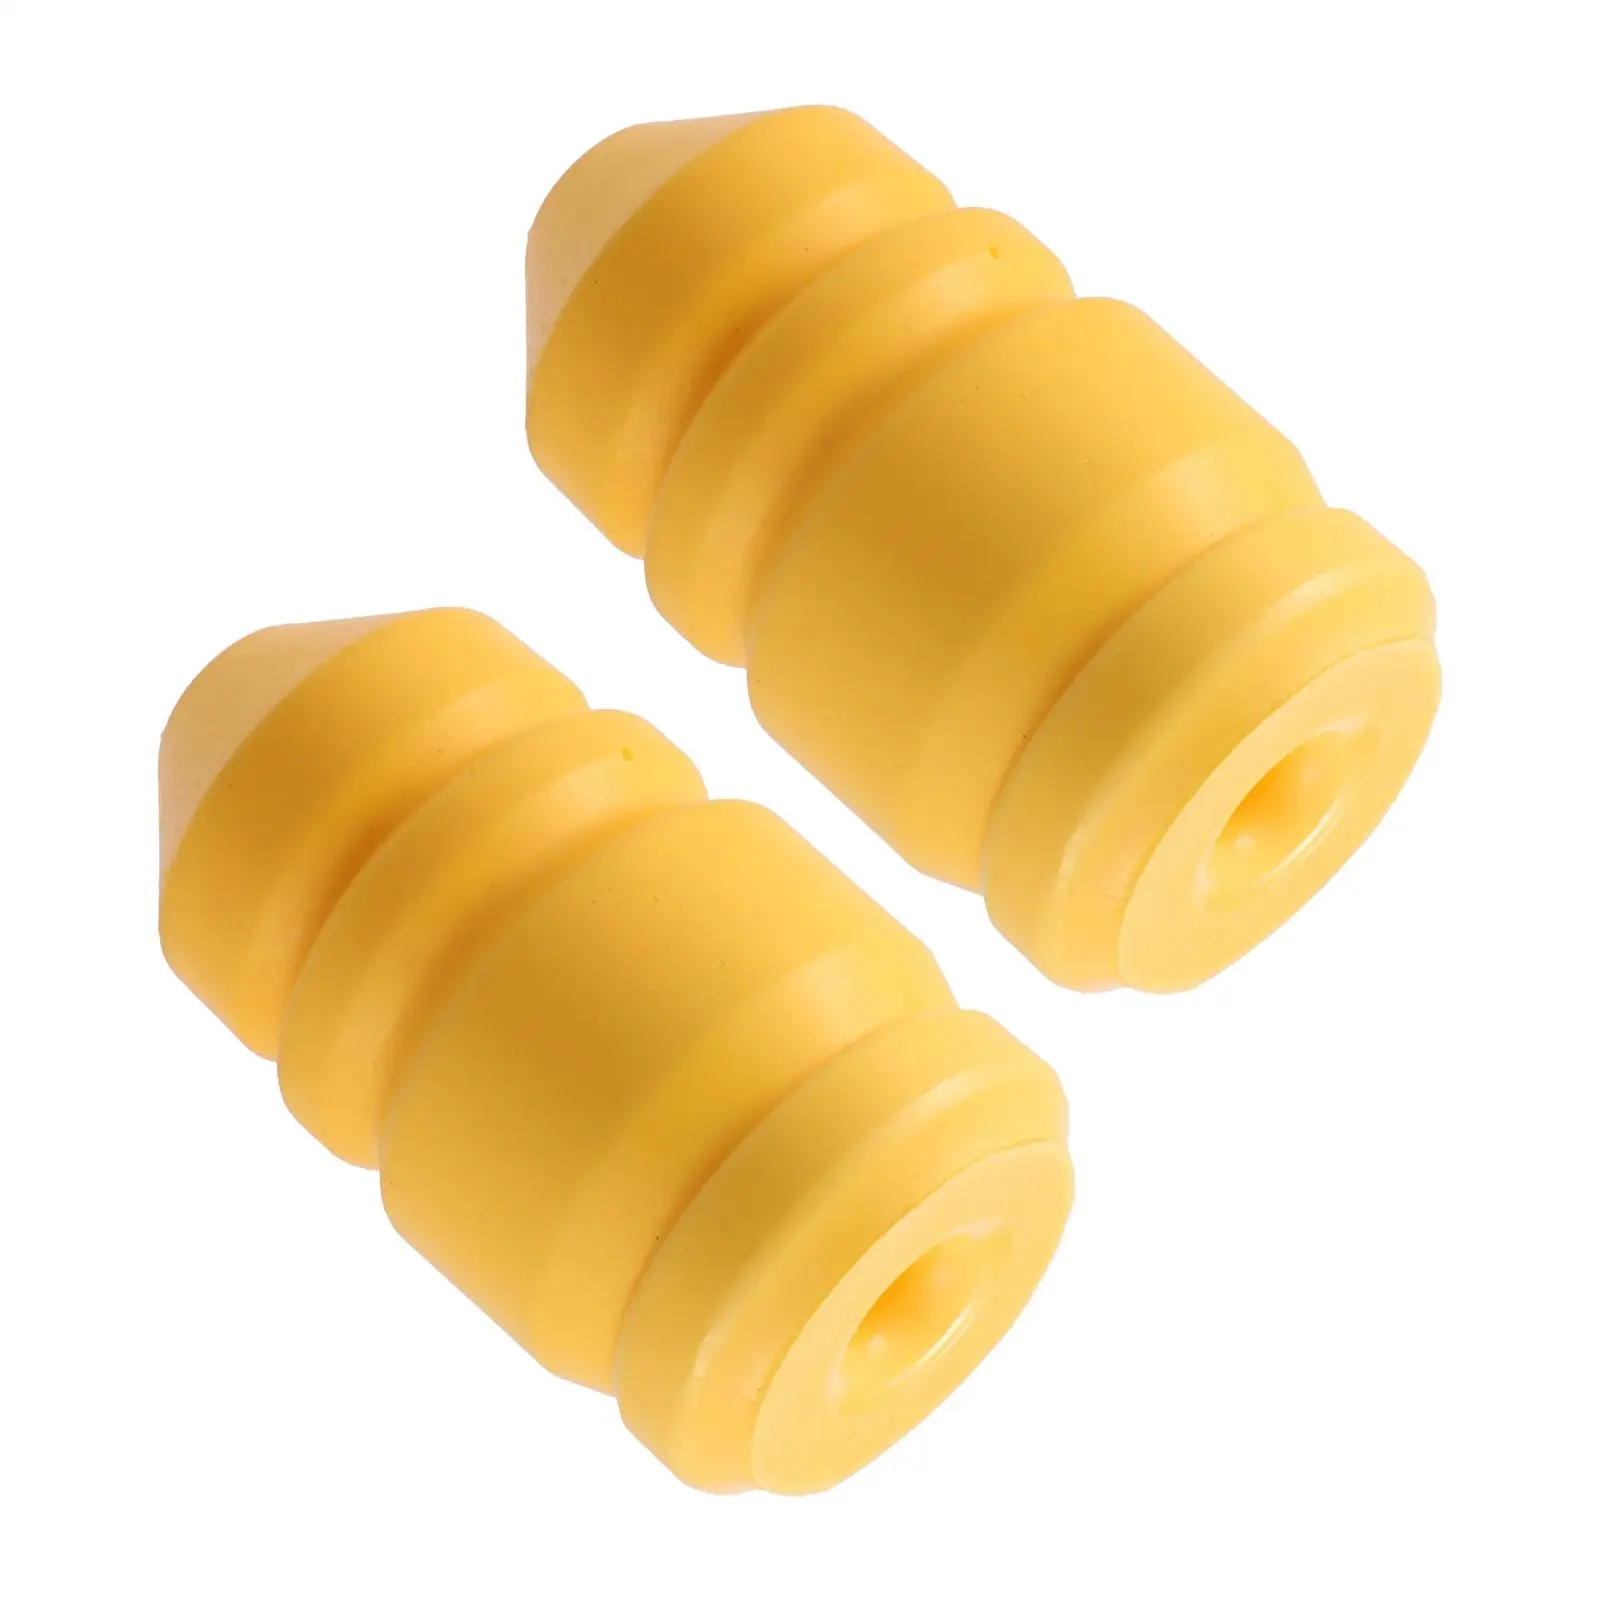 Rear Jounce Bumper Stop 52088352 Shock Absorber Repair Parts Bump Stop for Jeep Grand Cherokee Wj 1999-2004 Durable Yellow